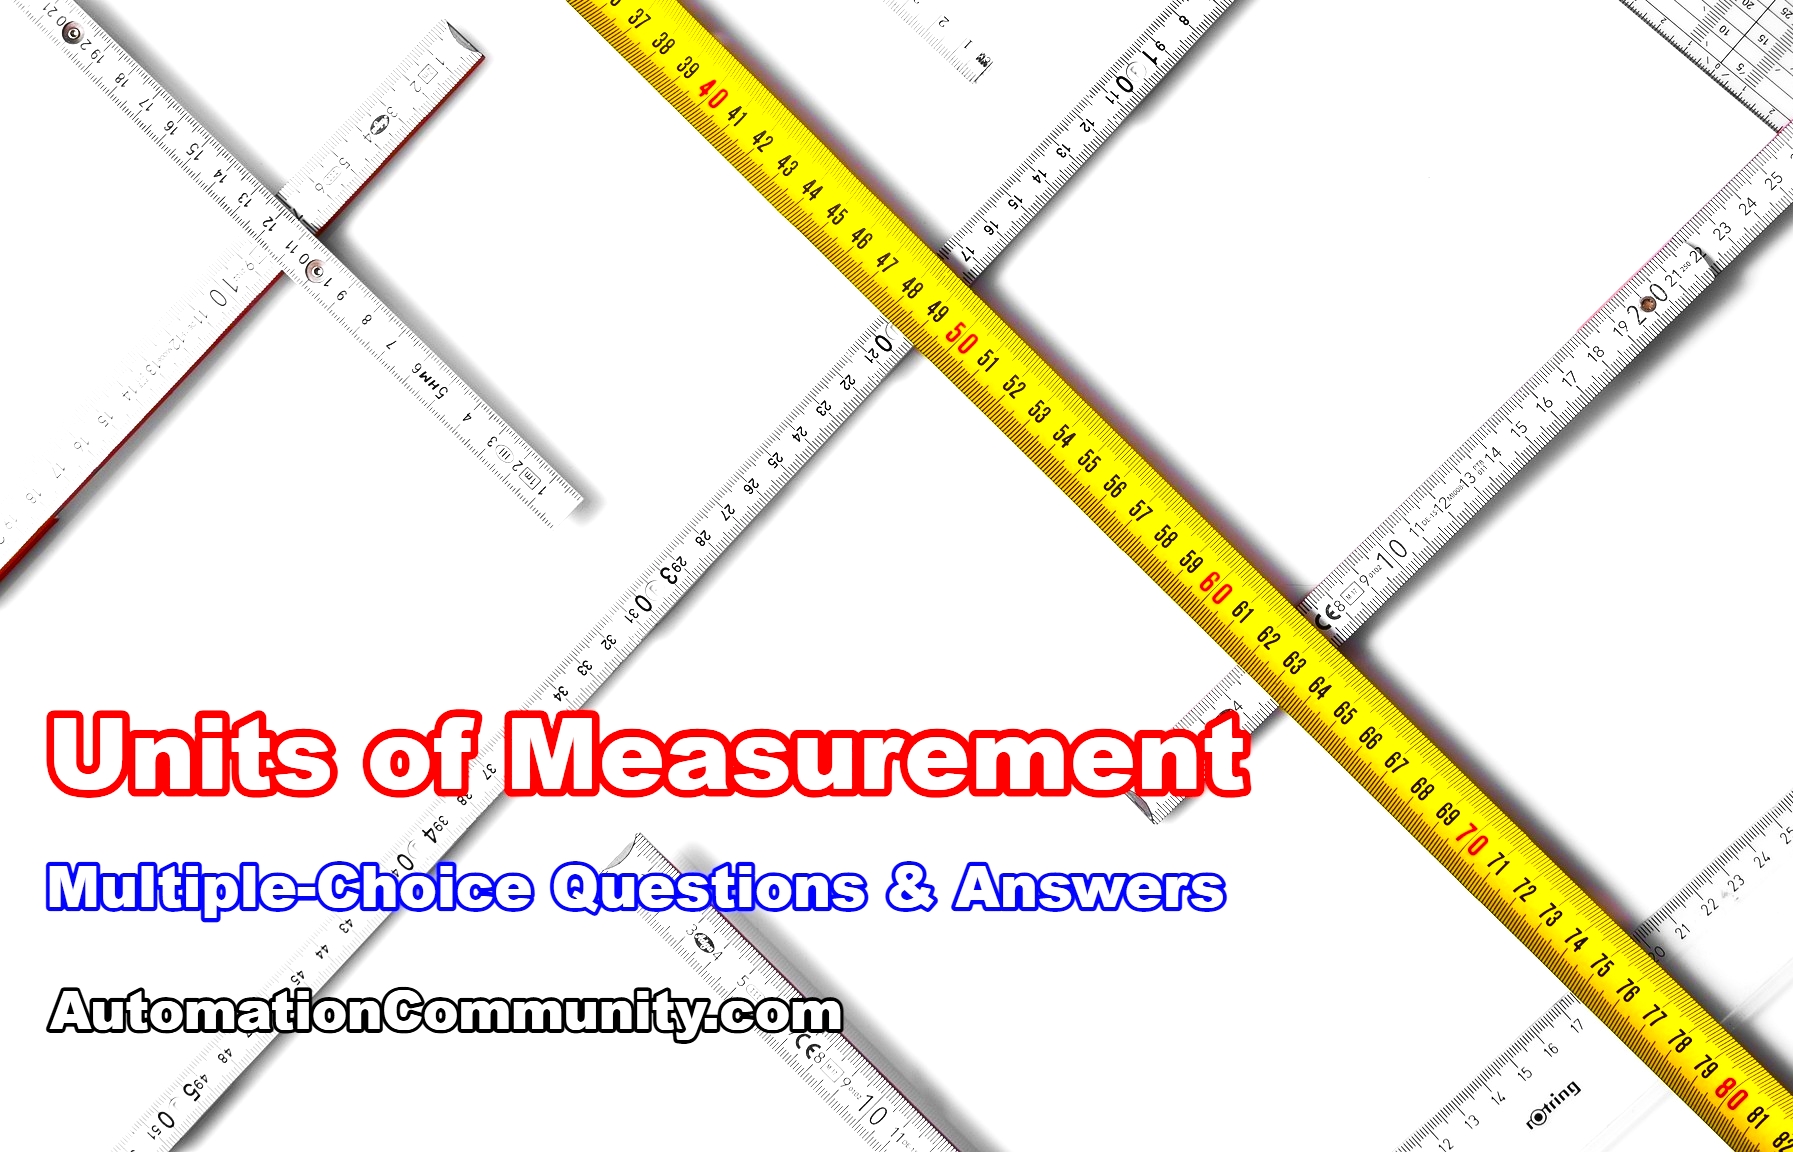 Units of Measurement Multiple-Choice Questions and Answers